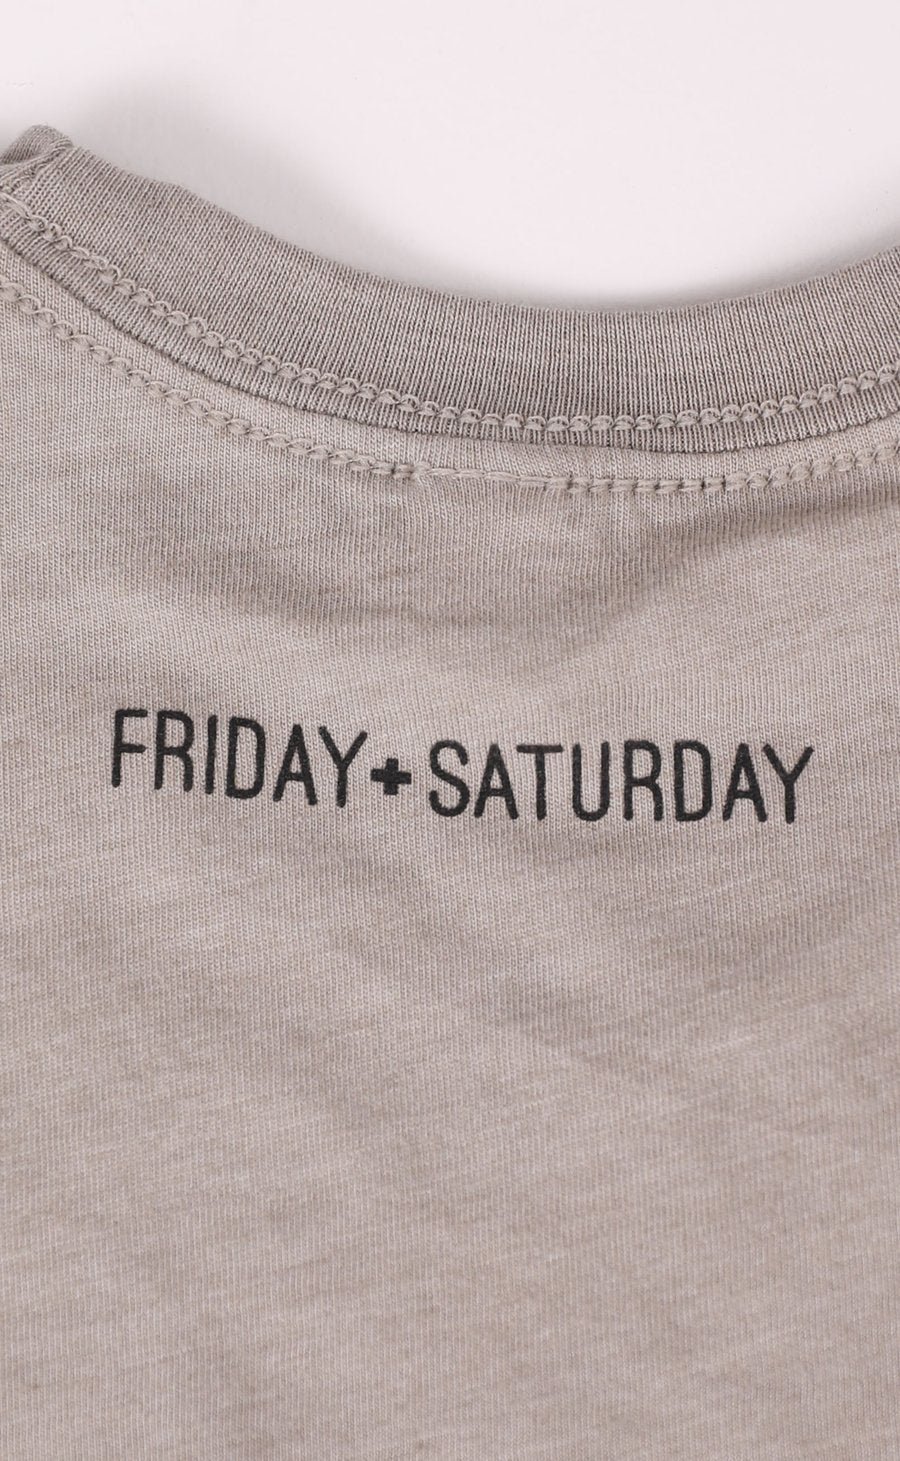 Friday + Saturday Tiny Dancer Onesie or Toddler Tee